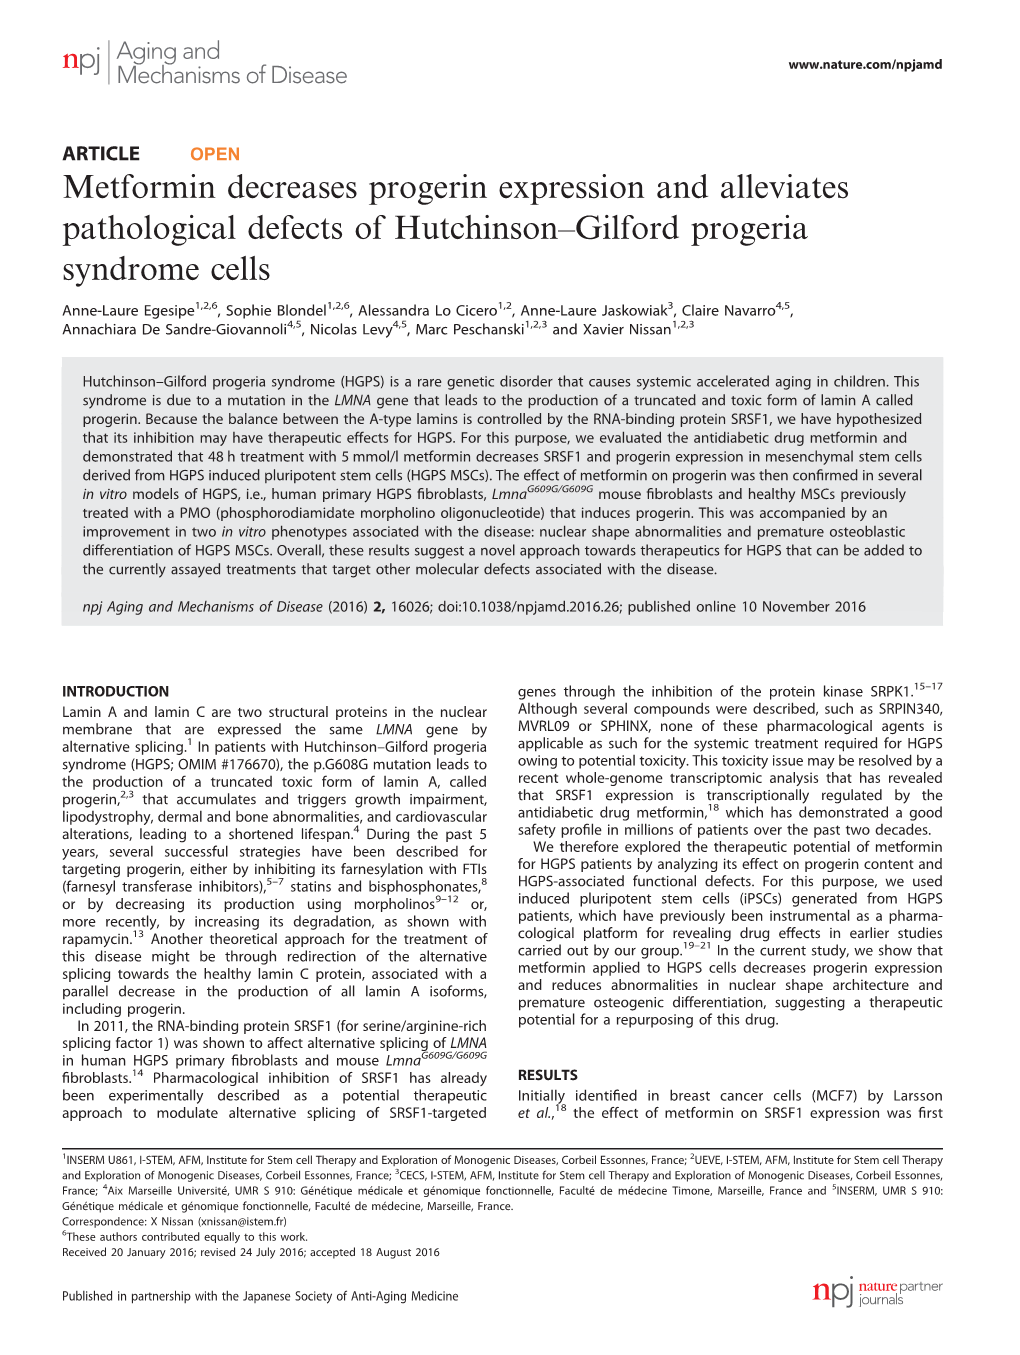 Metformin Decreases Progerin Expression and Alleviates Pathological Defects of Hutchinson–Gilford Progeria Syndrome Cells